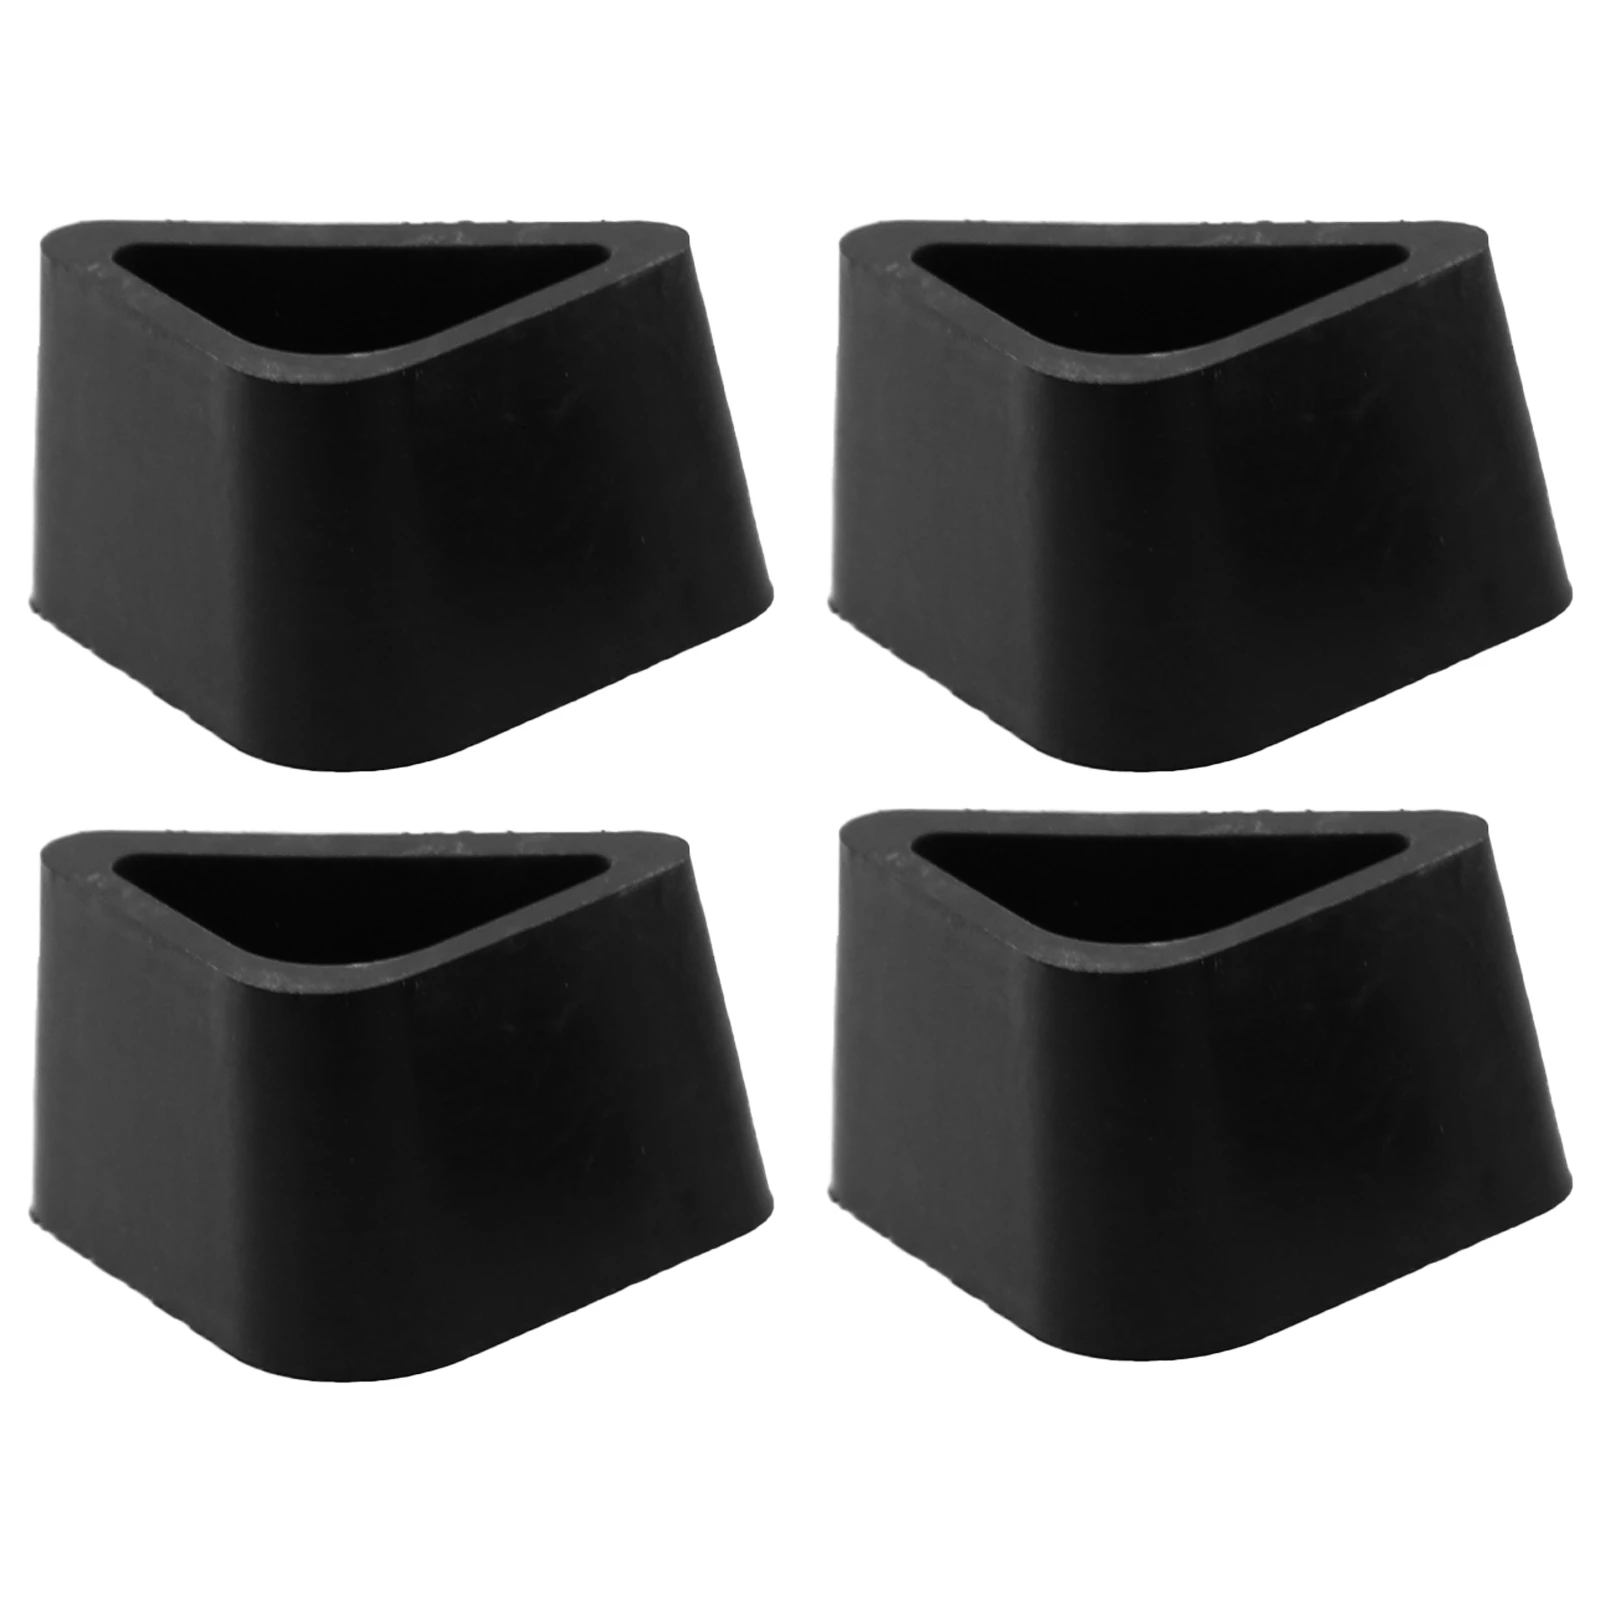 4pcs 242394-00 Foot Replacement for Black and Decker workmate parts WM225 &  WM425